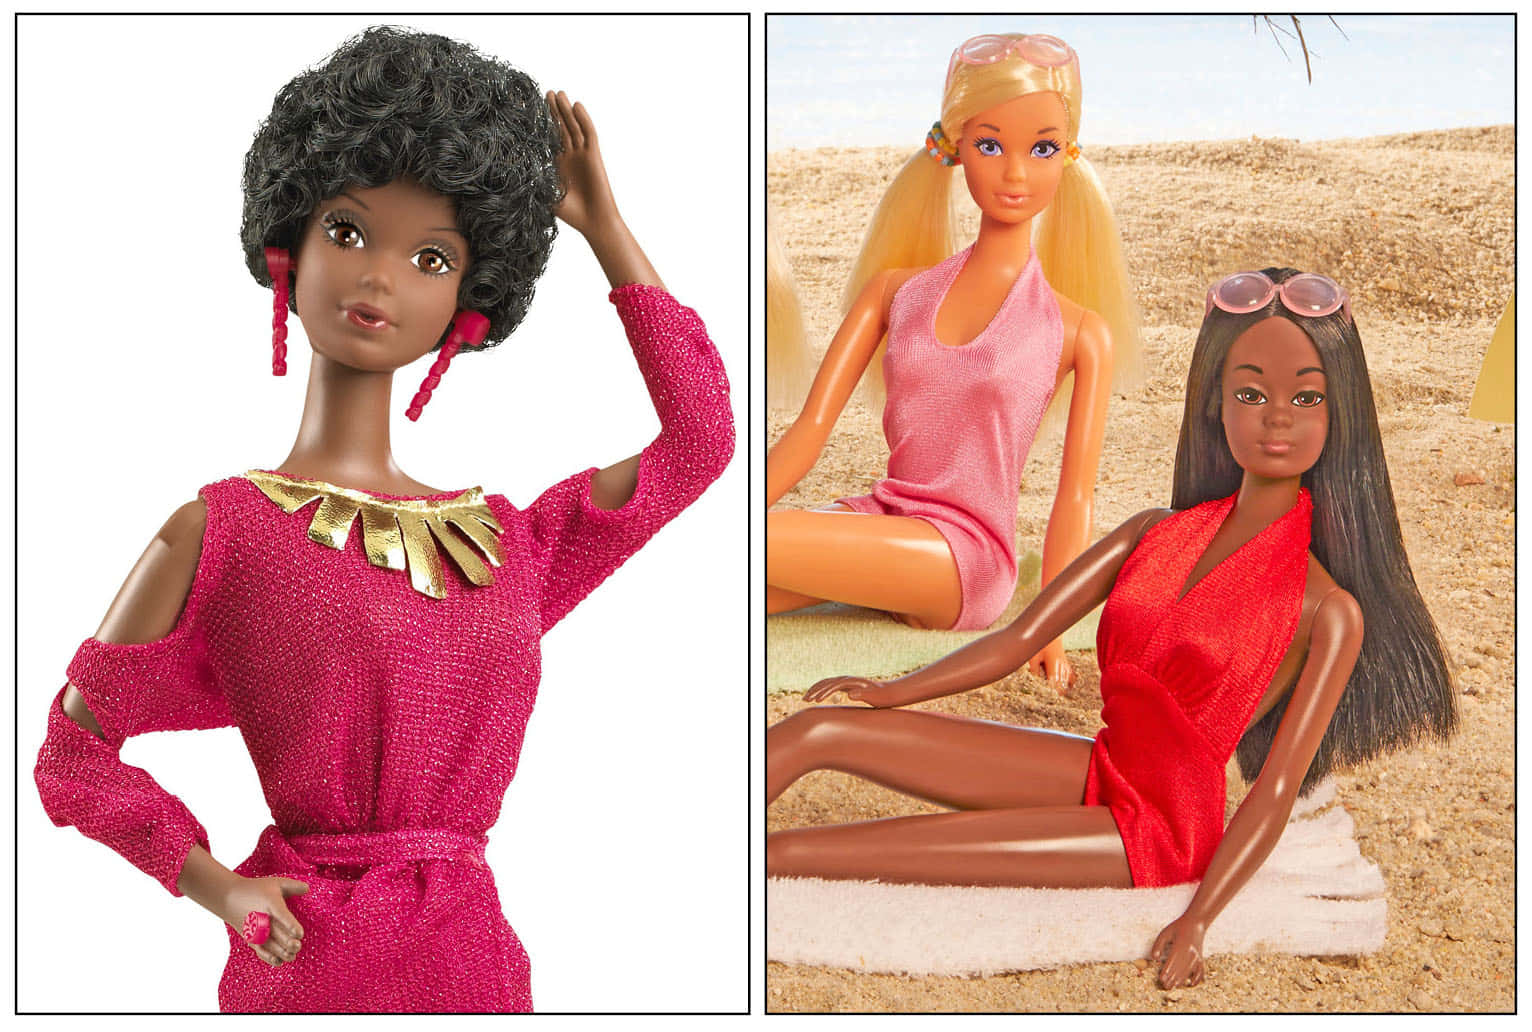 "A perfect addition to any child's toy collection – the iconic Barbie Doll"